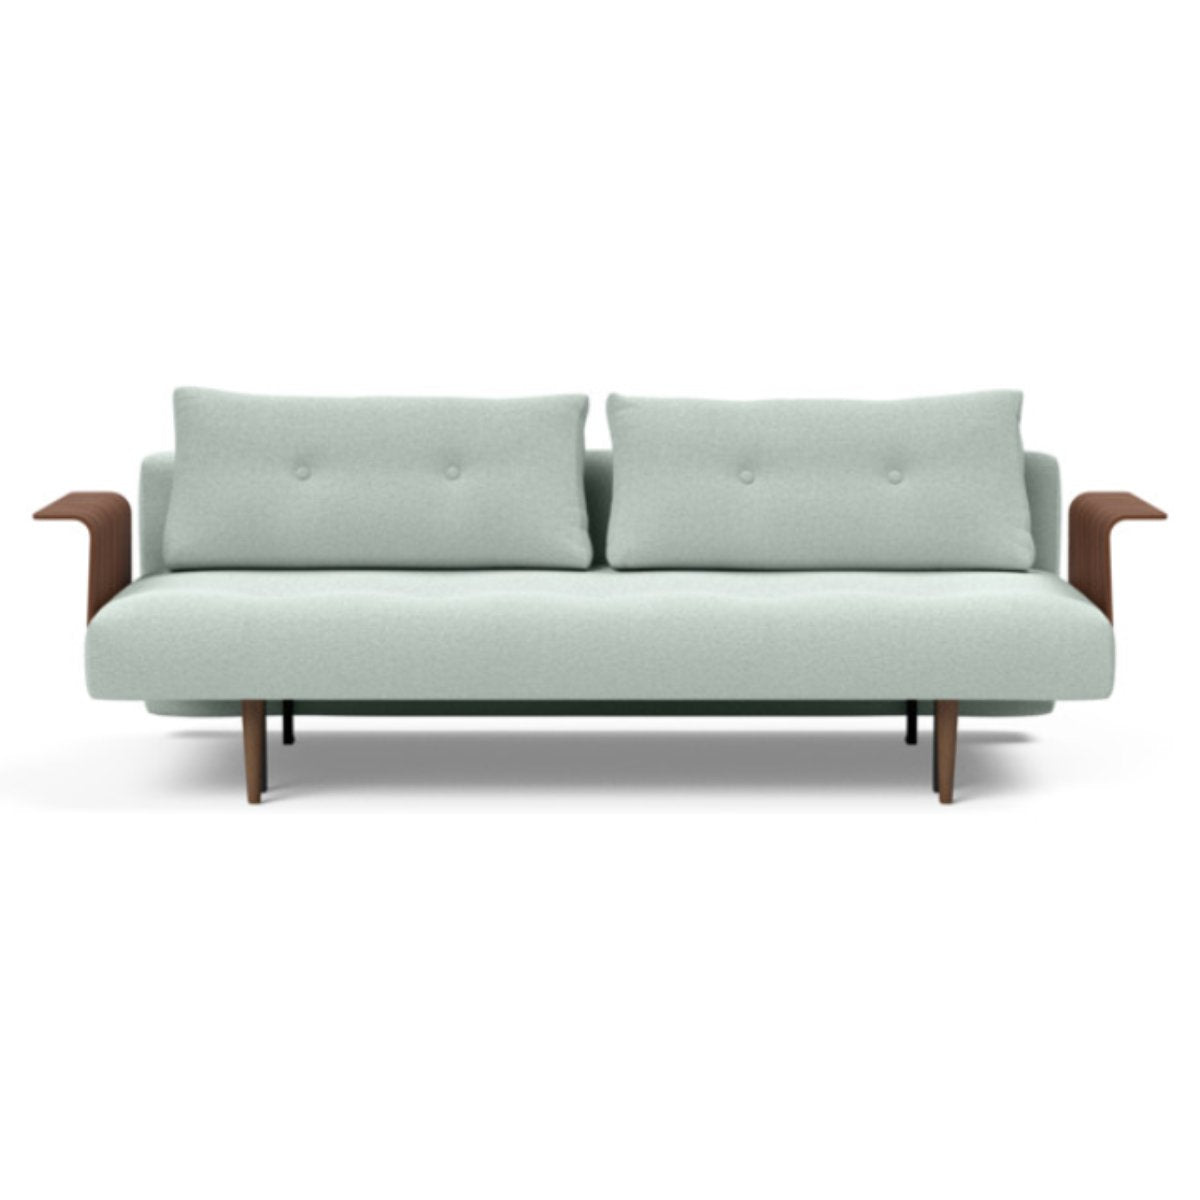 Recast Plus Sofa Bed Dark Styletto With Arms 552 Soft Pacific PearlDaybed INNOVATION  552 Soft Pacific Pearl   Four Hands, Burke Decor, Mid Century Modern Furniture, Old Bones Furniture Company, Old Bones Co, Modern Mid Century, Designer Furniture, https://www.oldbonesco.com/